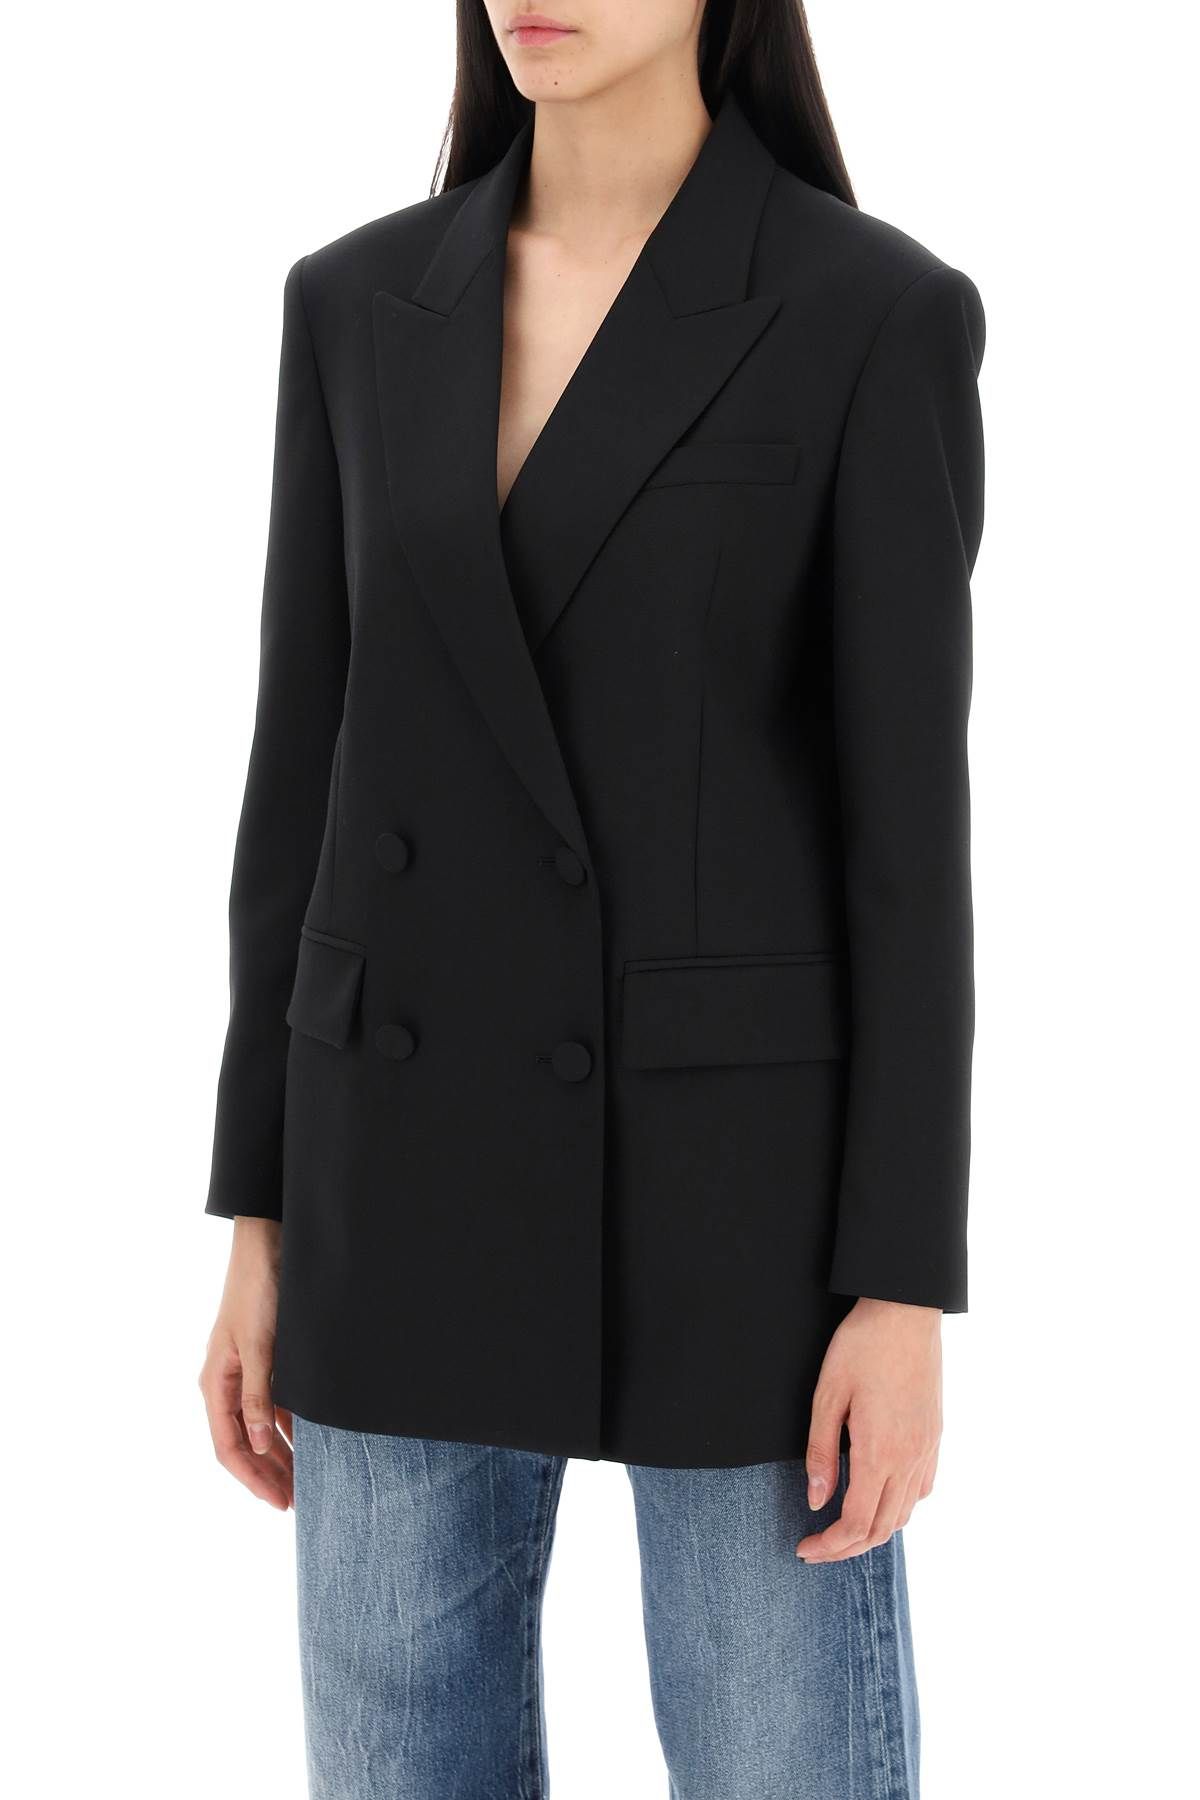 Shop Valentino Tailored Wool Jacket For Men In Black